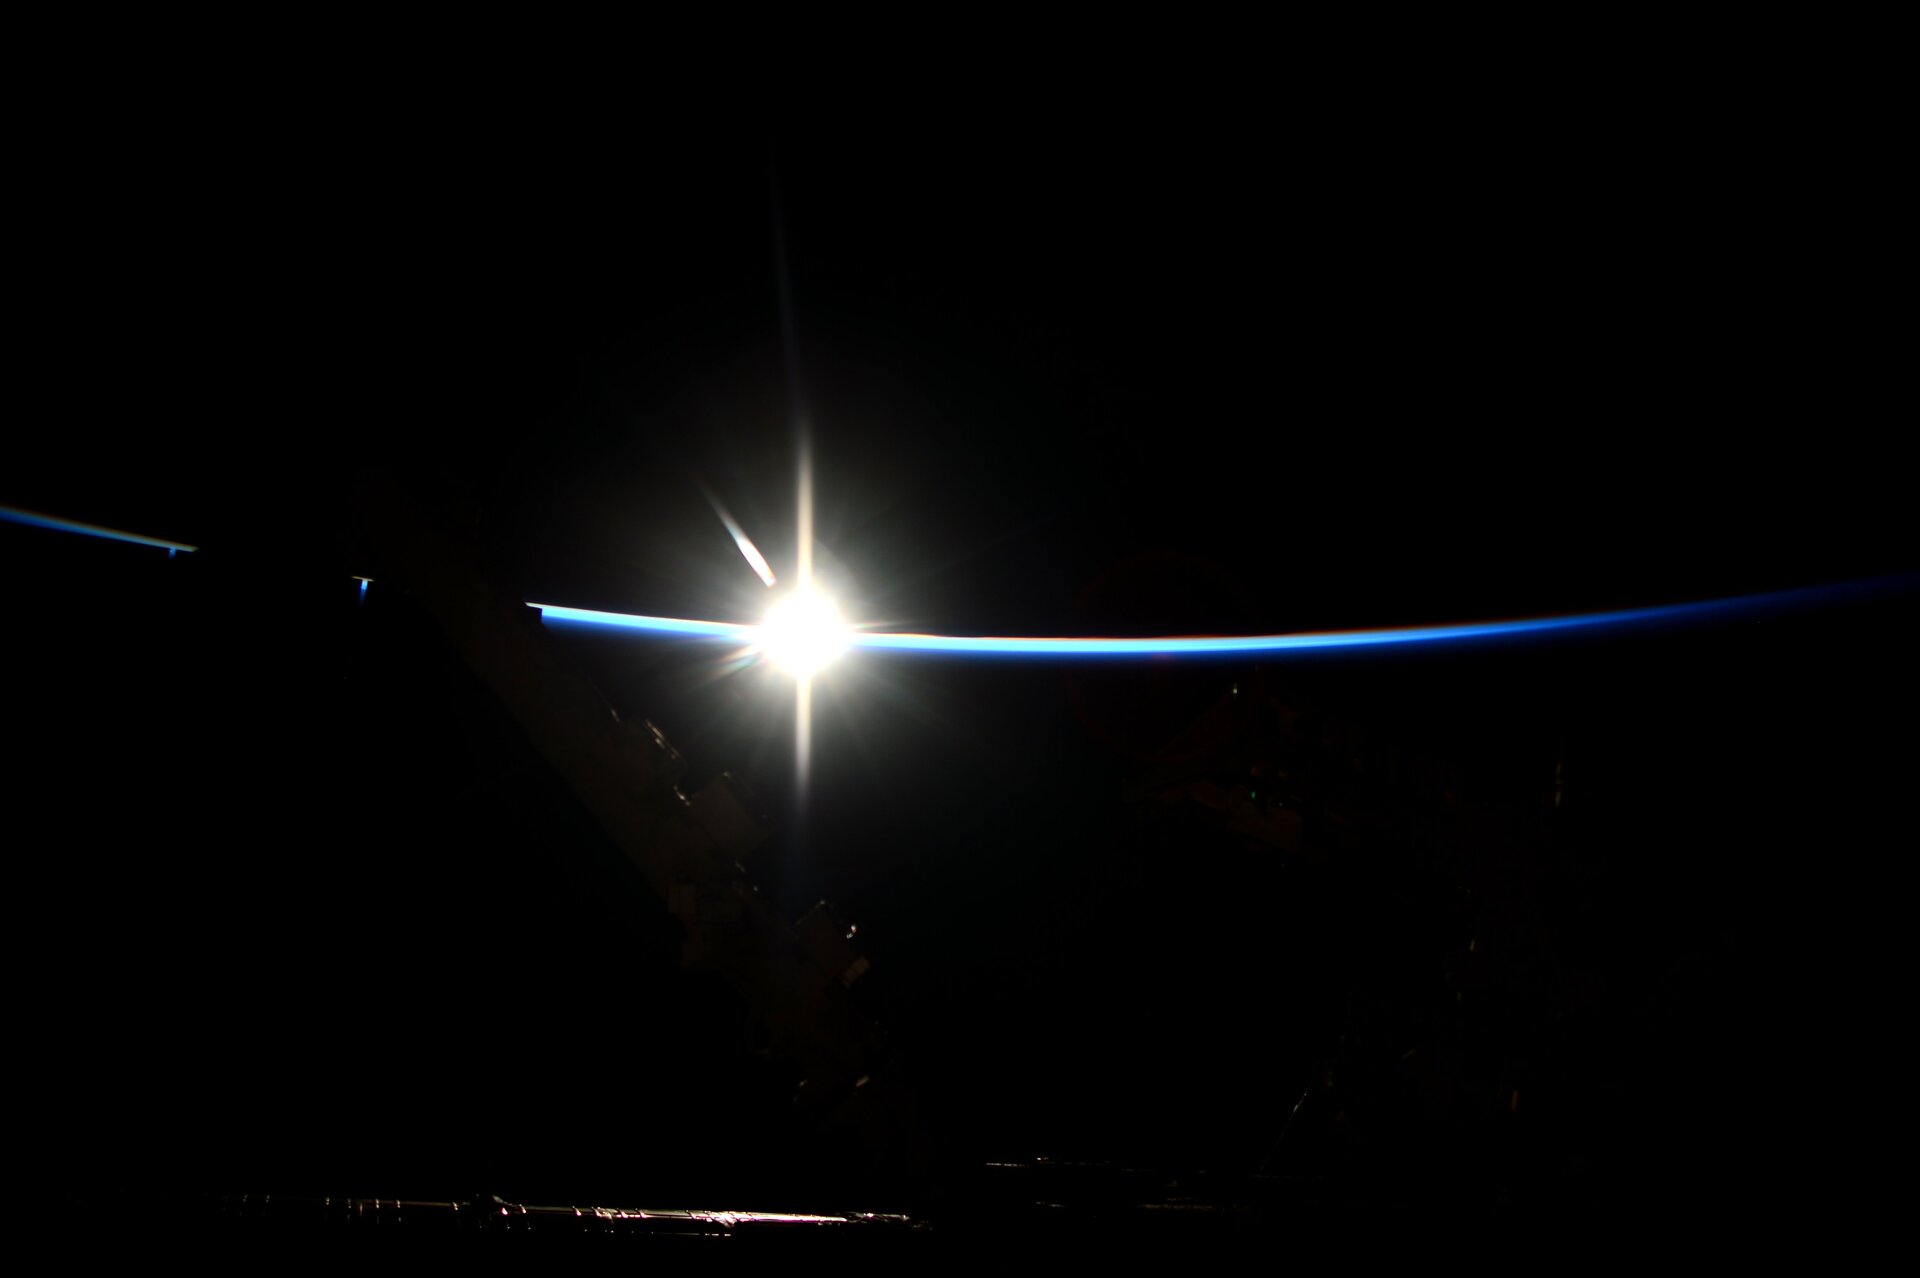 Sunrise seen from Space Station highlighting our atmosphere